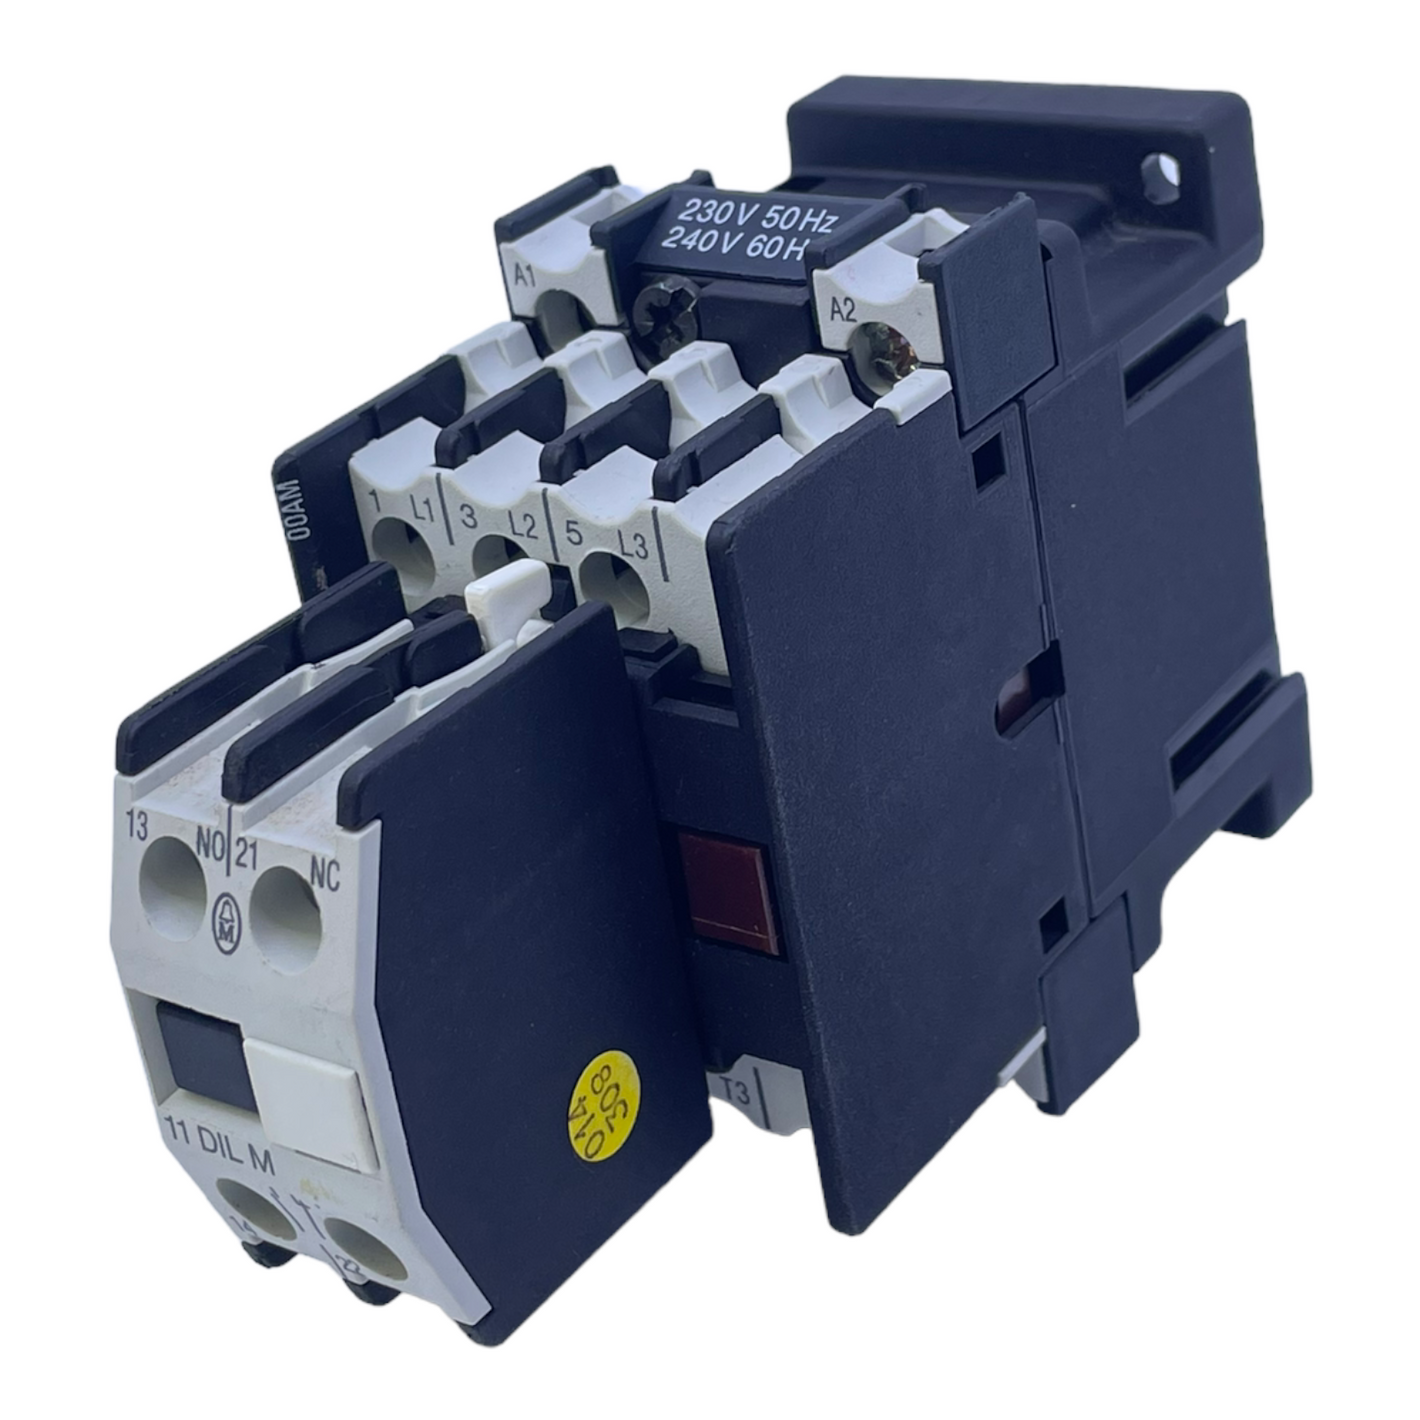 Moeller DIL00AM + 11DILM power contactor 230V 50Hz 240V 60Hz with auxiliary contactor 